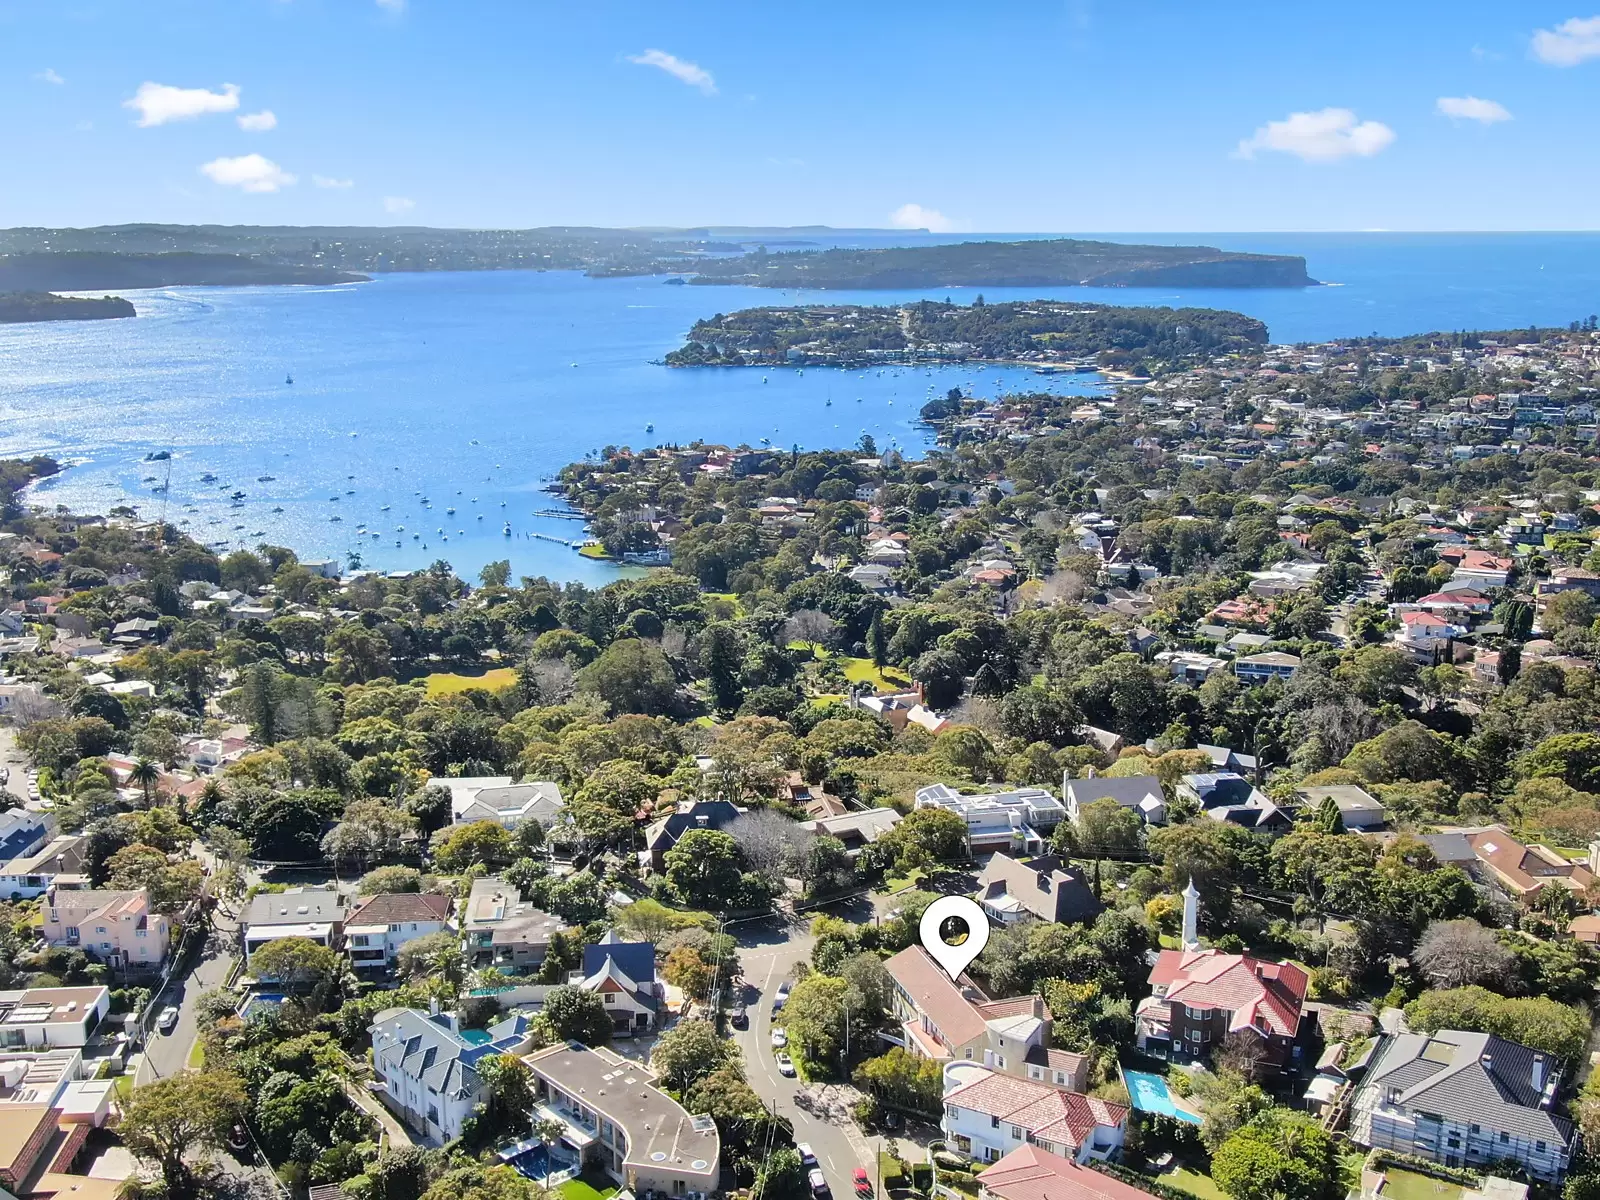 Photo #15: 25 Gilliver Avenue, Vaucluse - Sold by Sydney Sotheby's International Realty